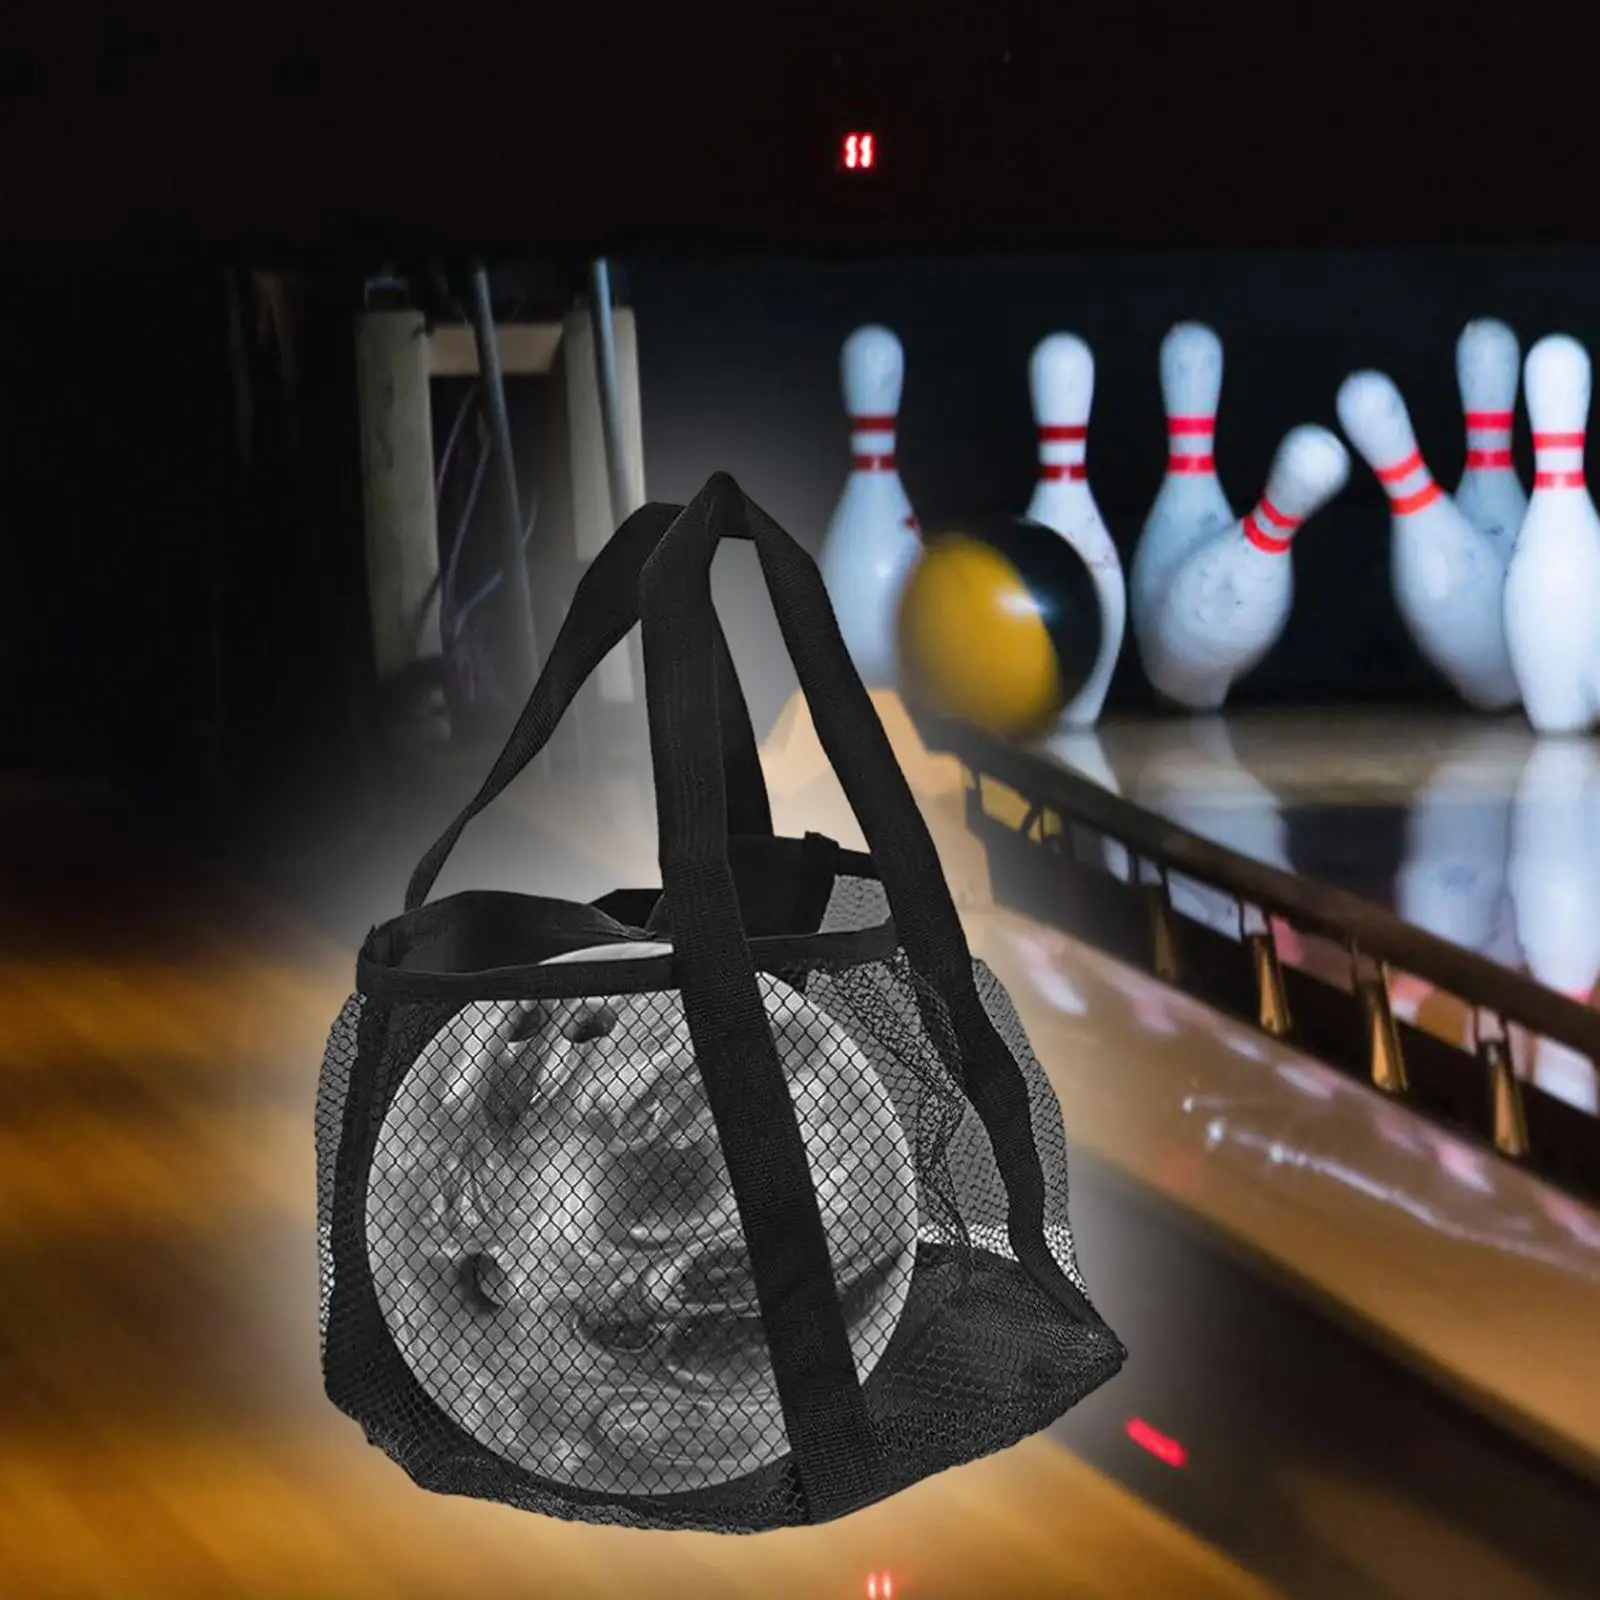 Single Bowling Ball Bag Bowling Tote Bag with Handle Bowling Ball Holder Carrier Handbag for Outdoor Sports Practice Training